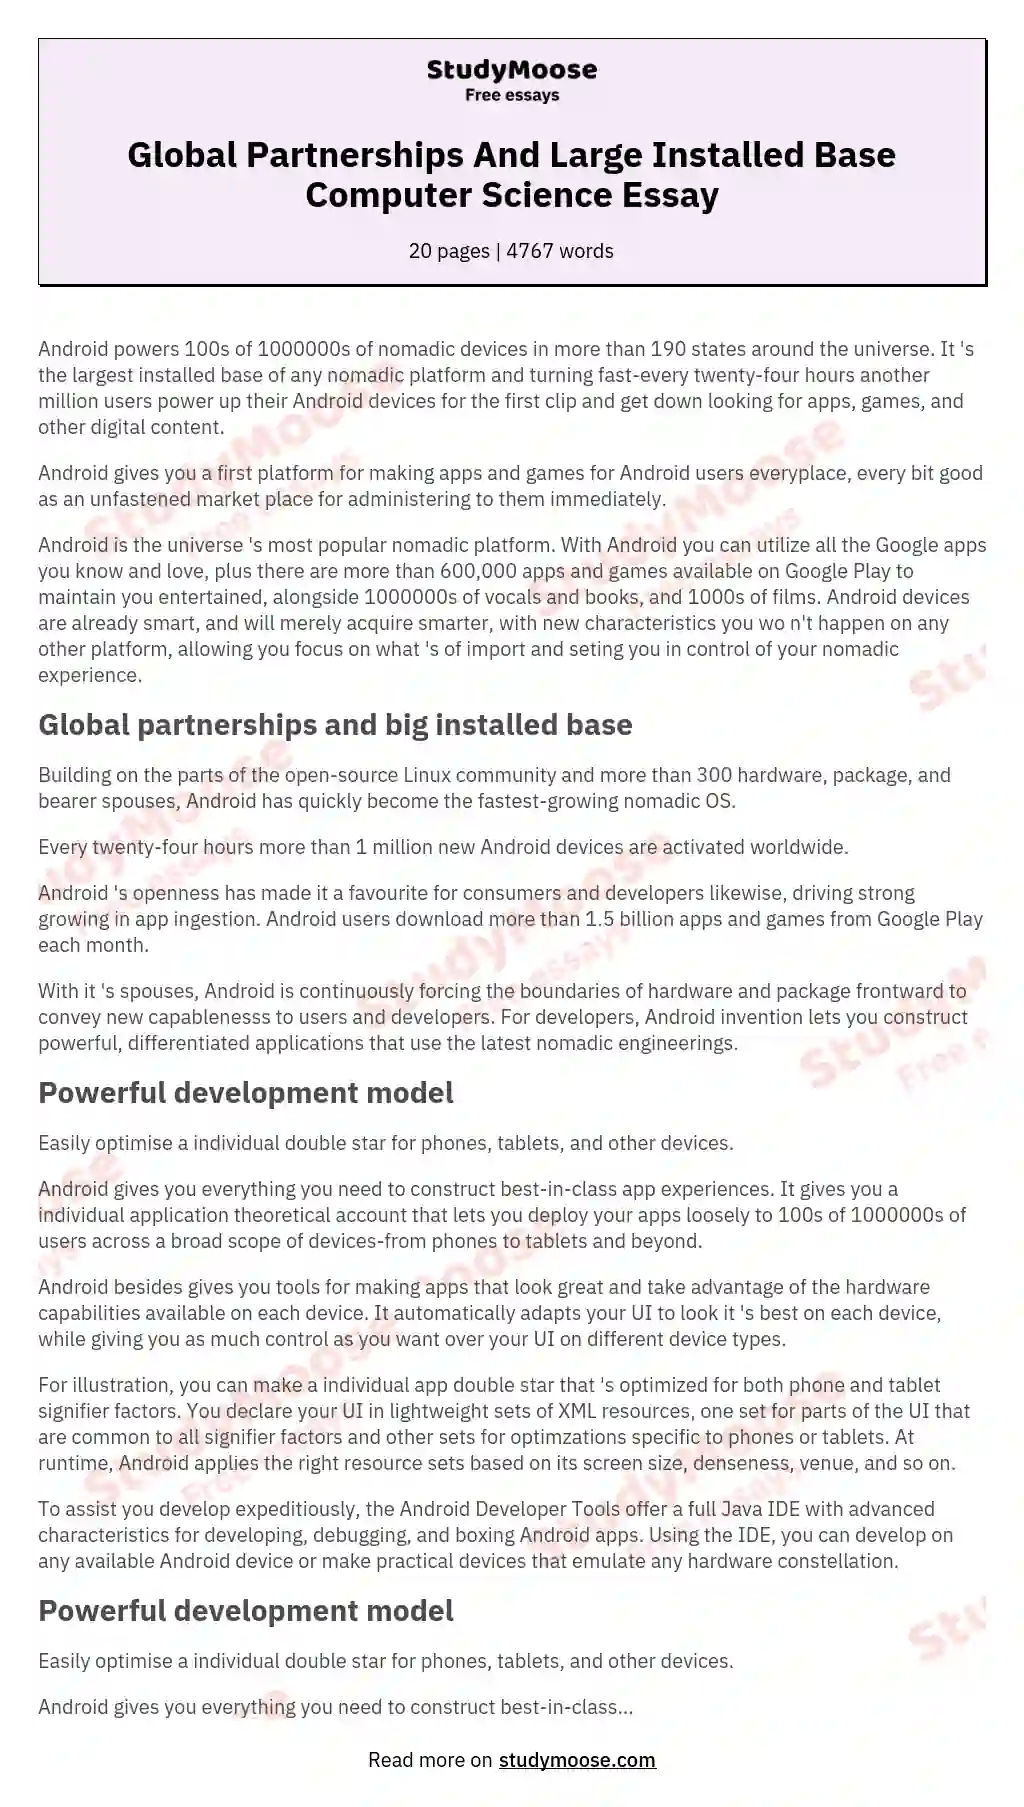 Global Partnerships And Large Installed Base Computer Science Essay essay